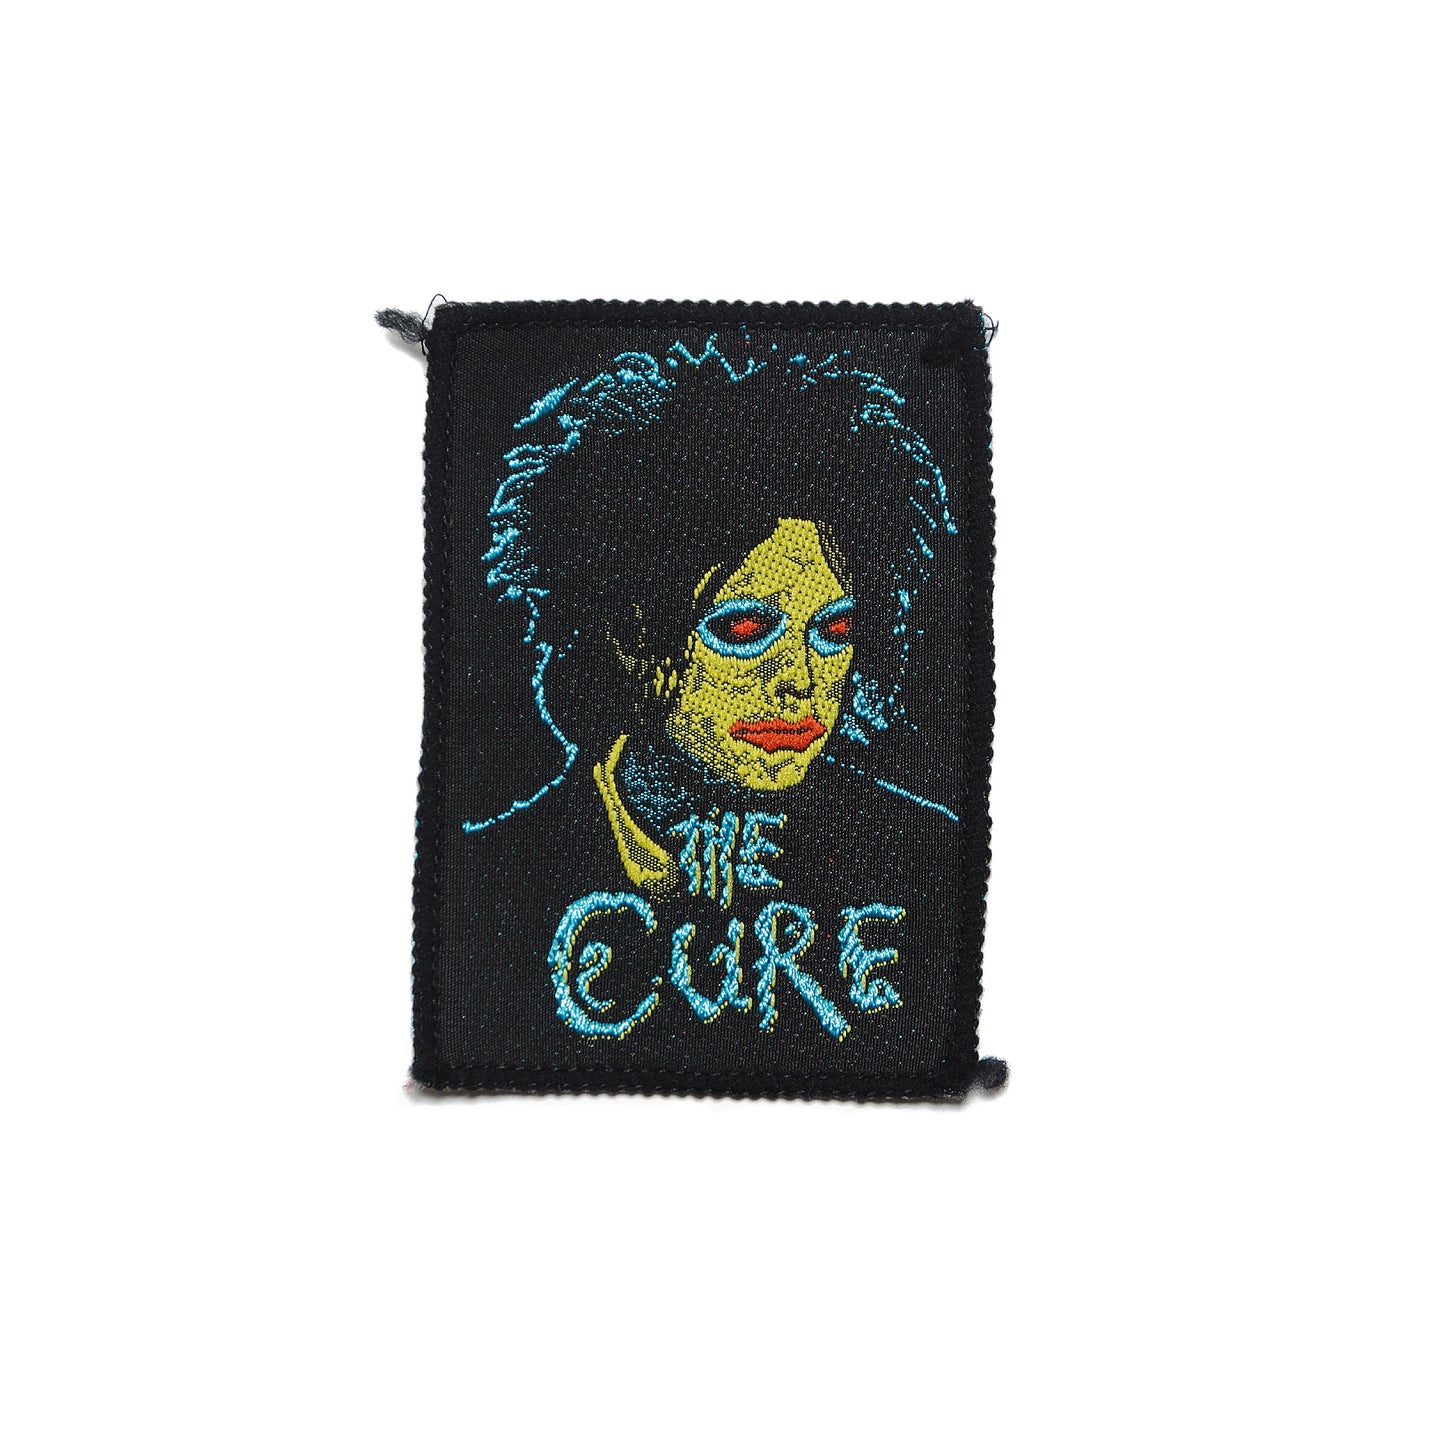 VINTAGE THE CURE WOVEN PATCH